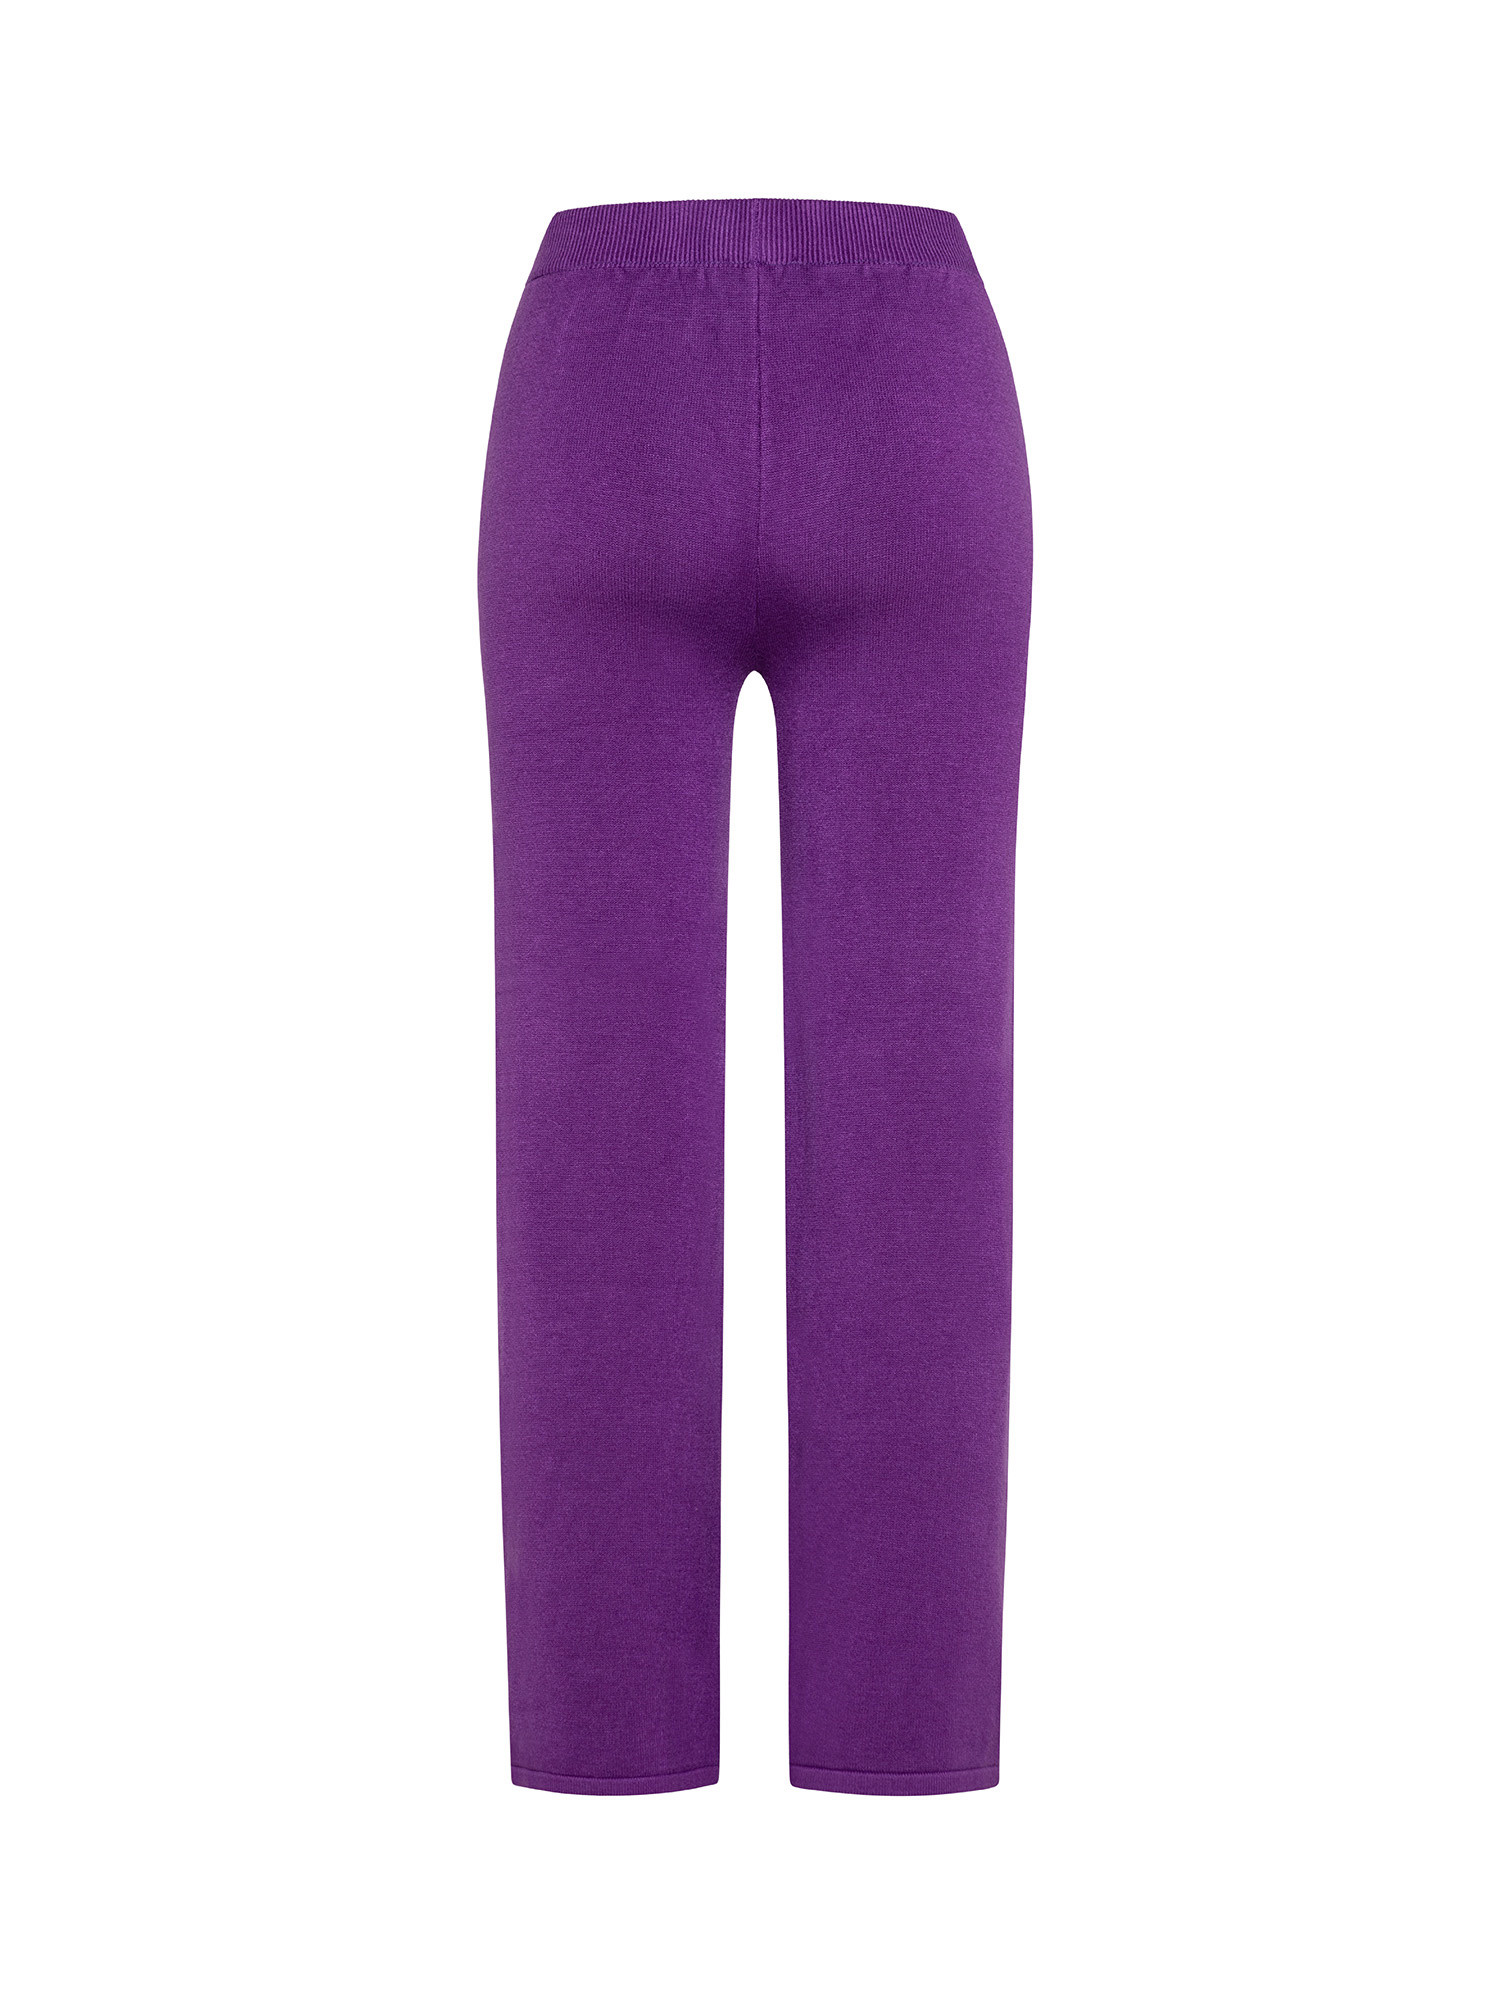 K Collection - Trousers, Purple, large image number 1